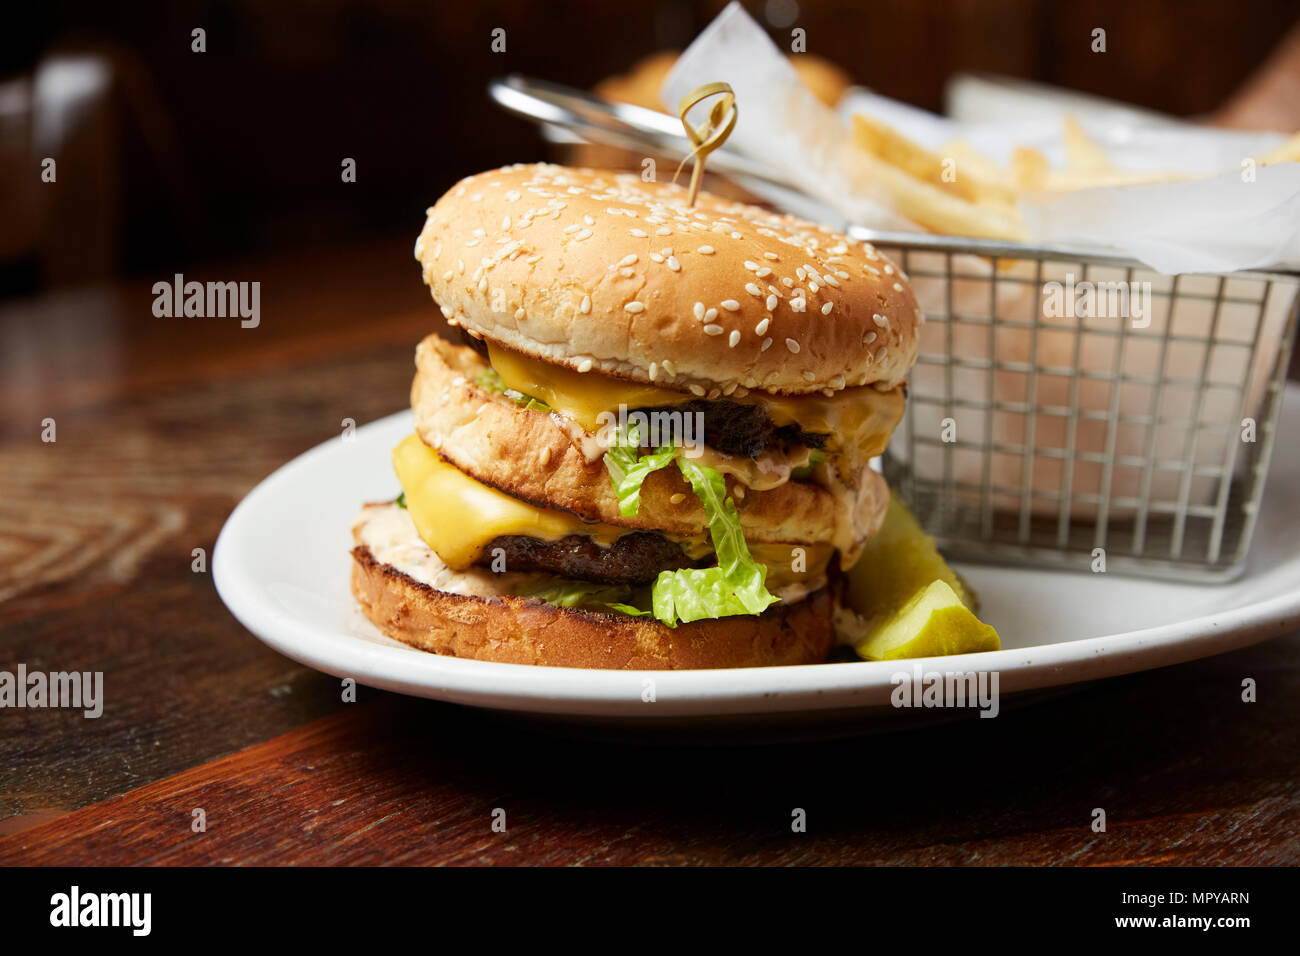 Close-up of cheeseburger served in plate on table Stock Photo